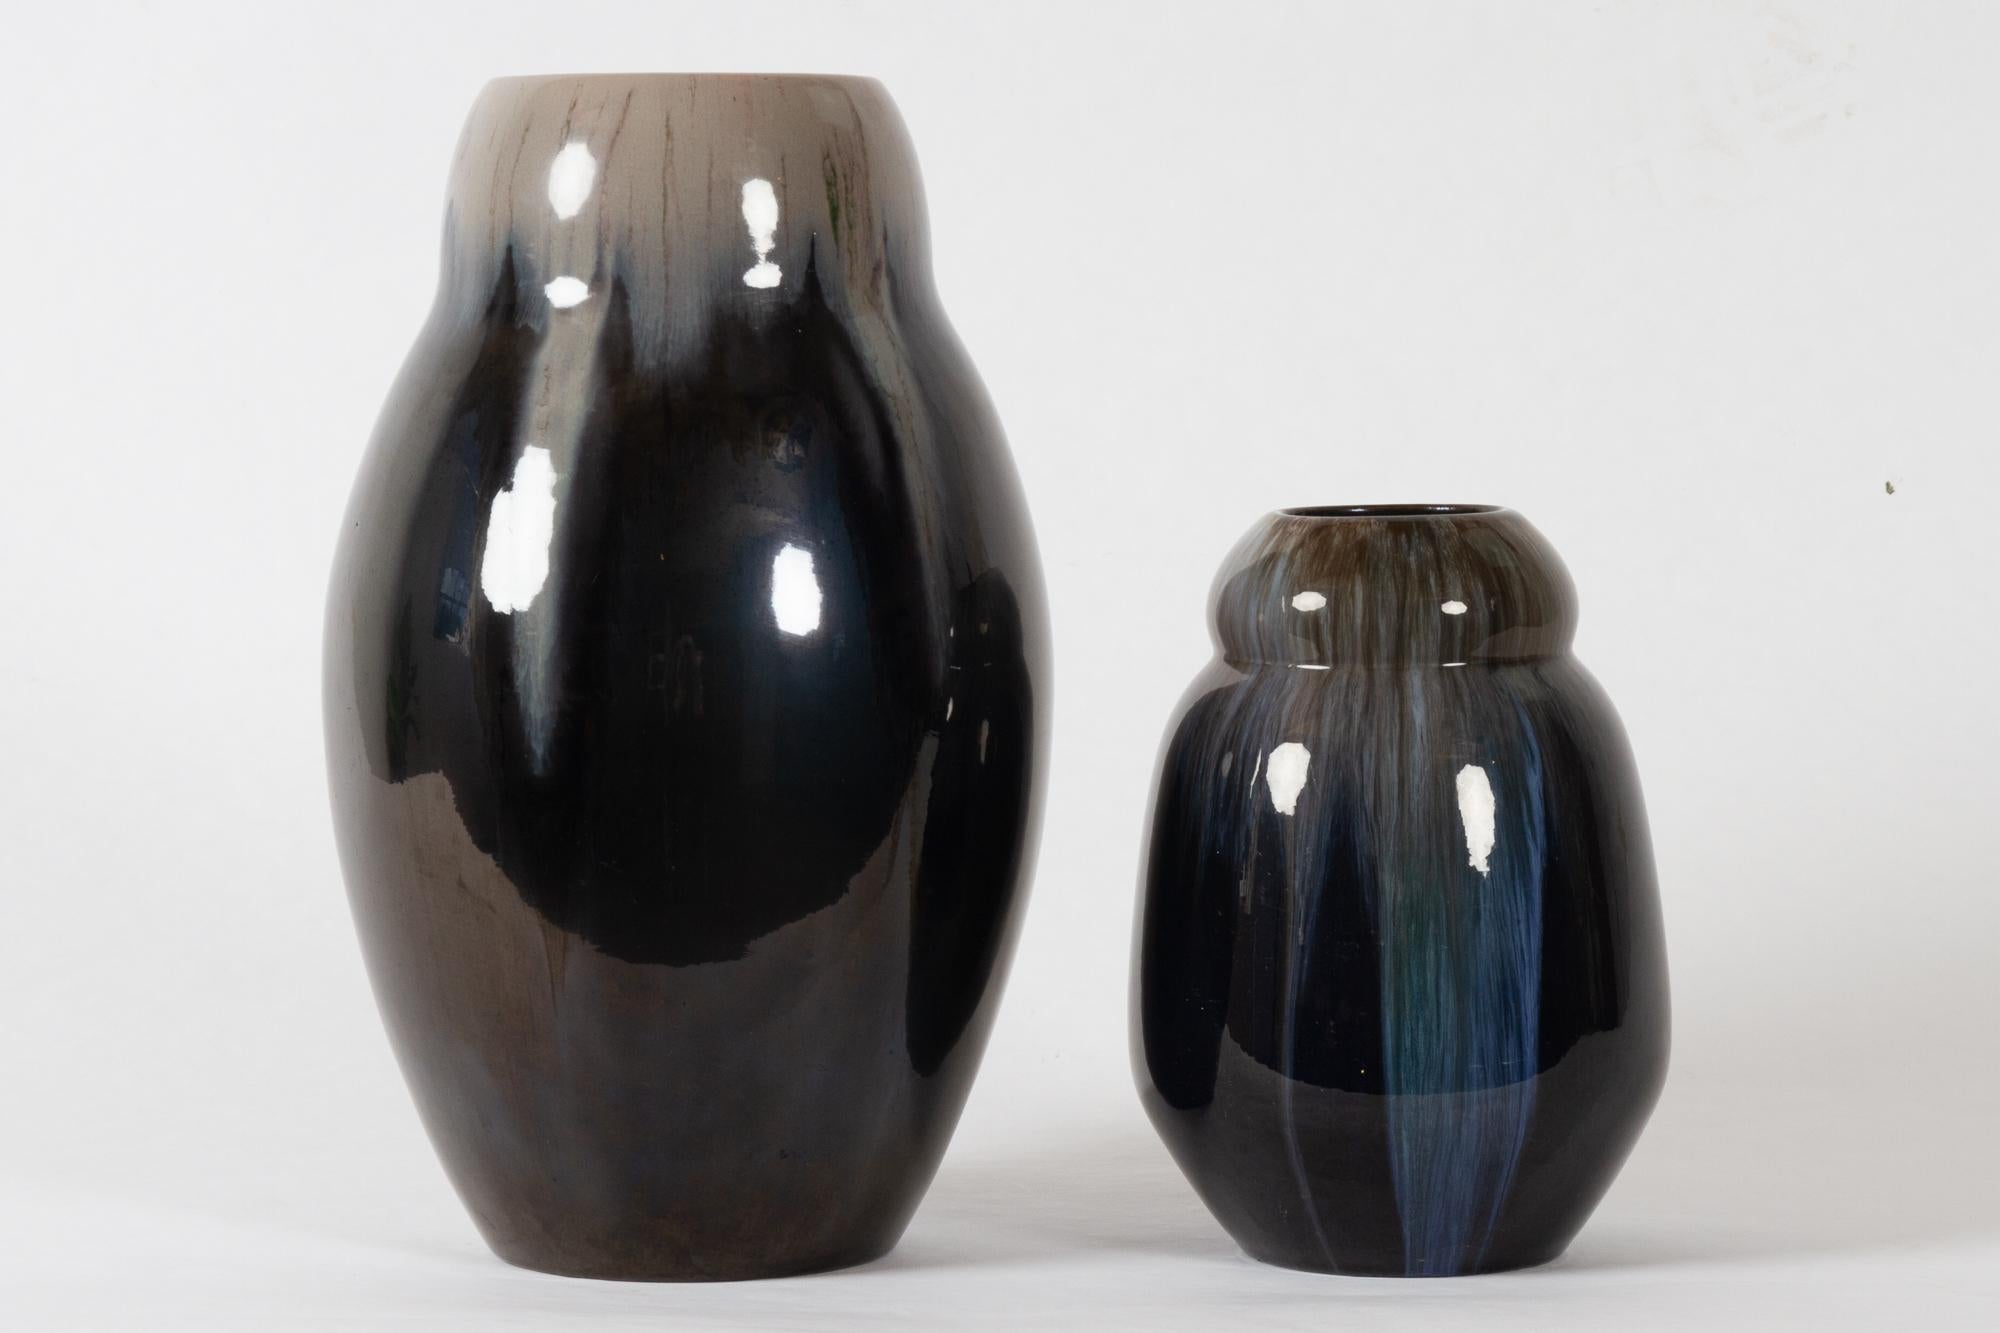 Vintage Danish vases by Michael Andersen & Son, set of 2
Two significant early vases from Michael Andersen & Son from the Danish island of Bornholm. Made by Daniel Andersen (son of Michael Andersen) between 1900 and 1920. Glaze in midnight blue